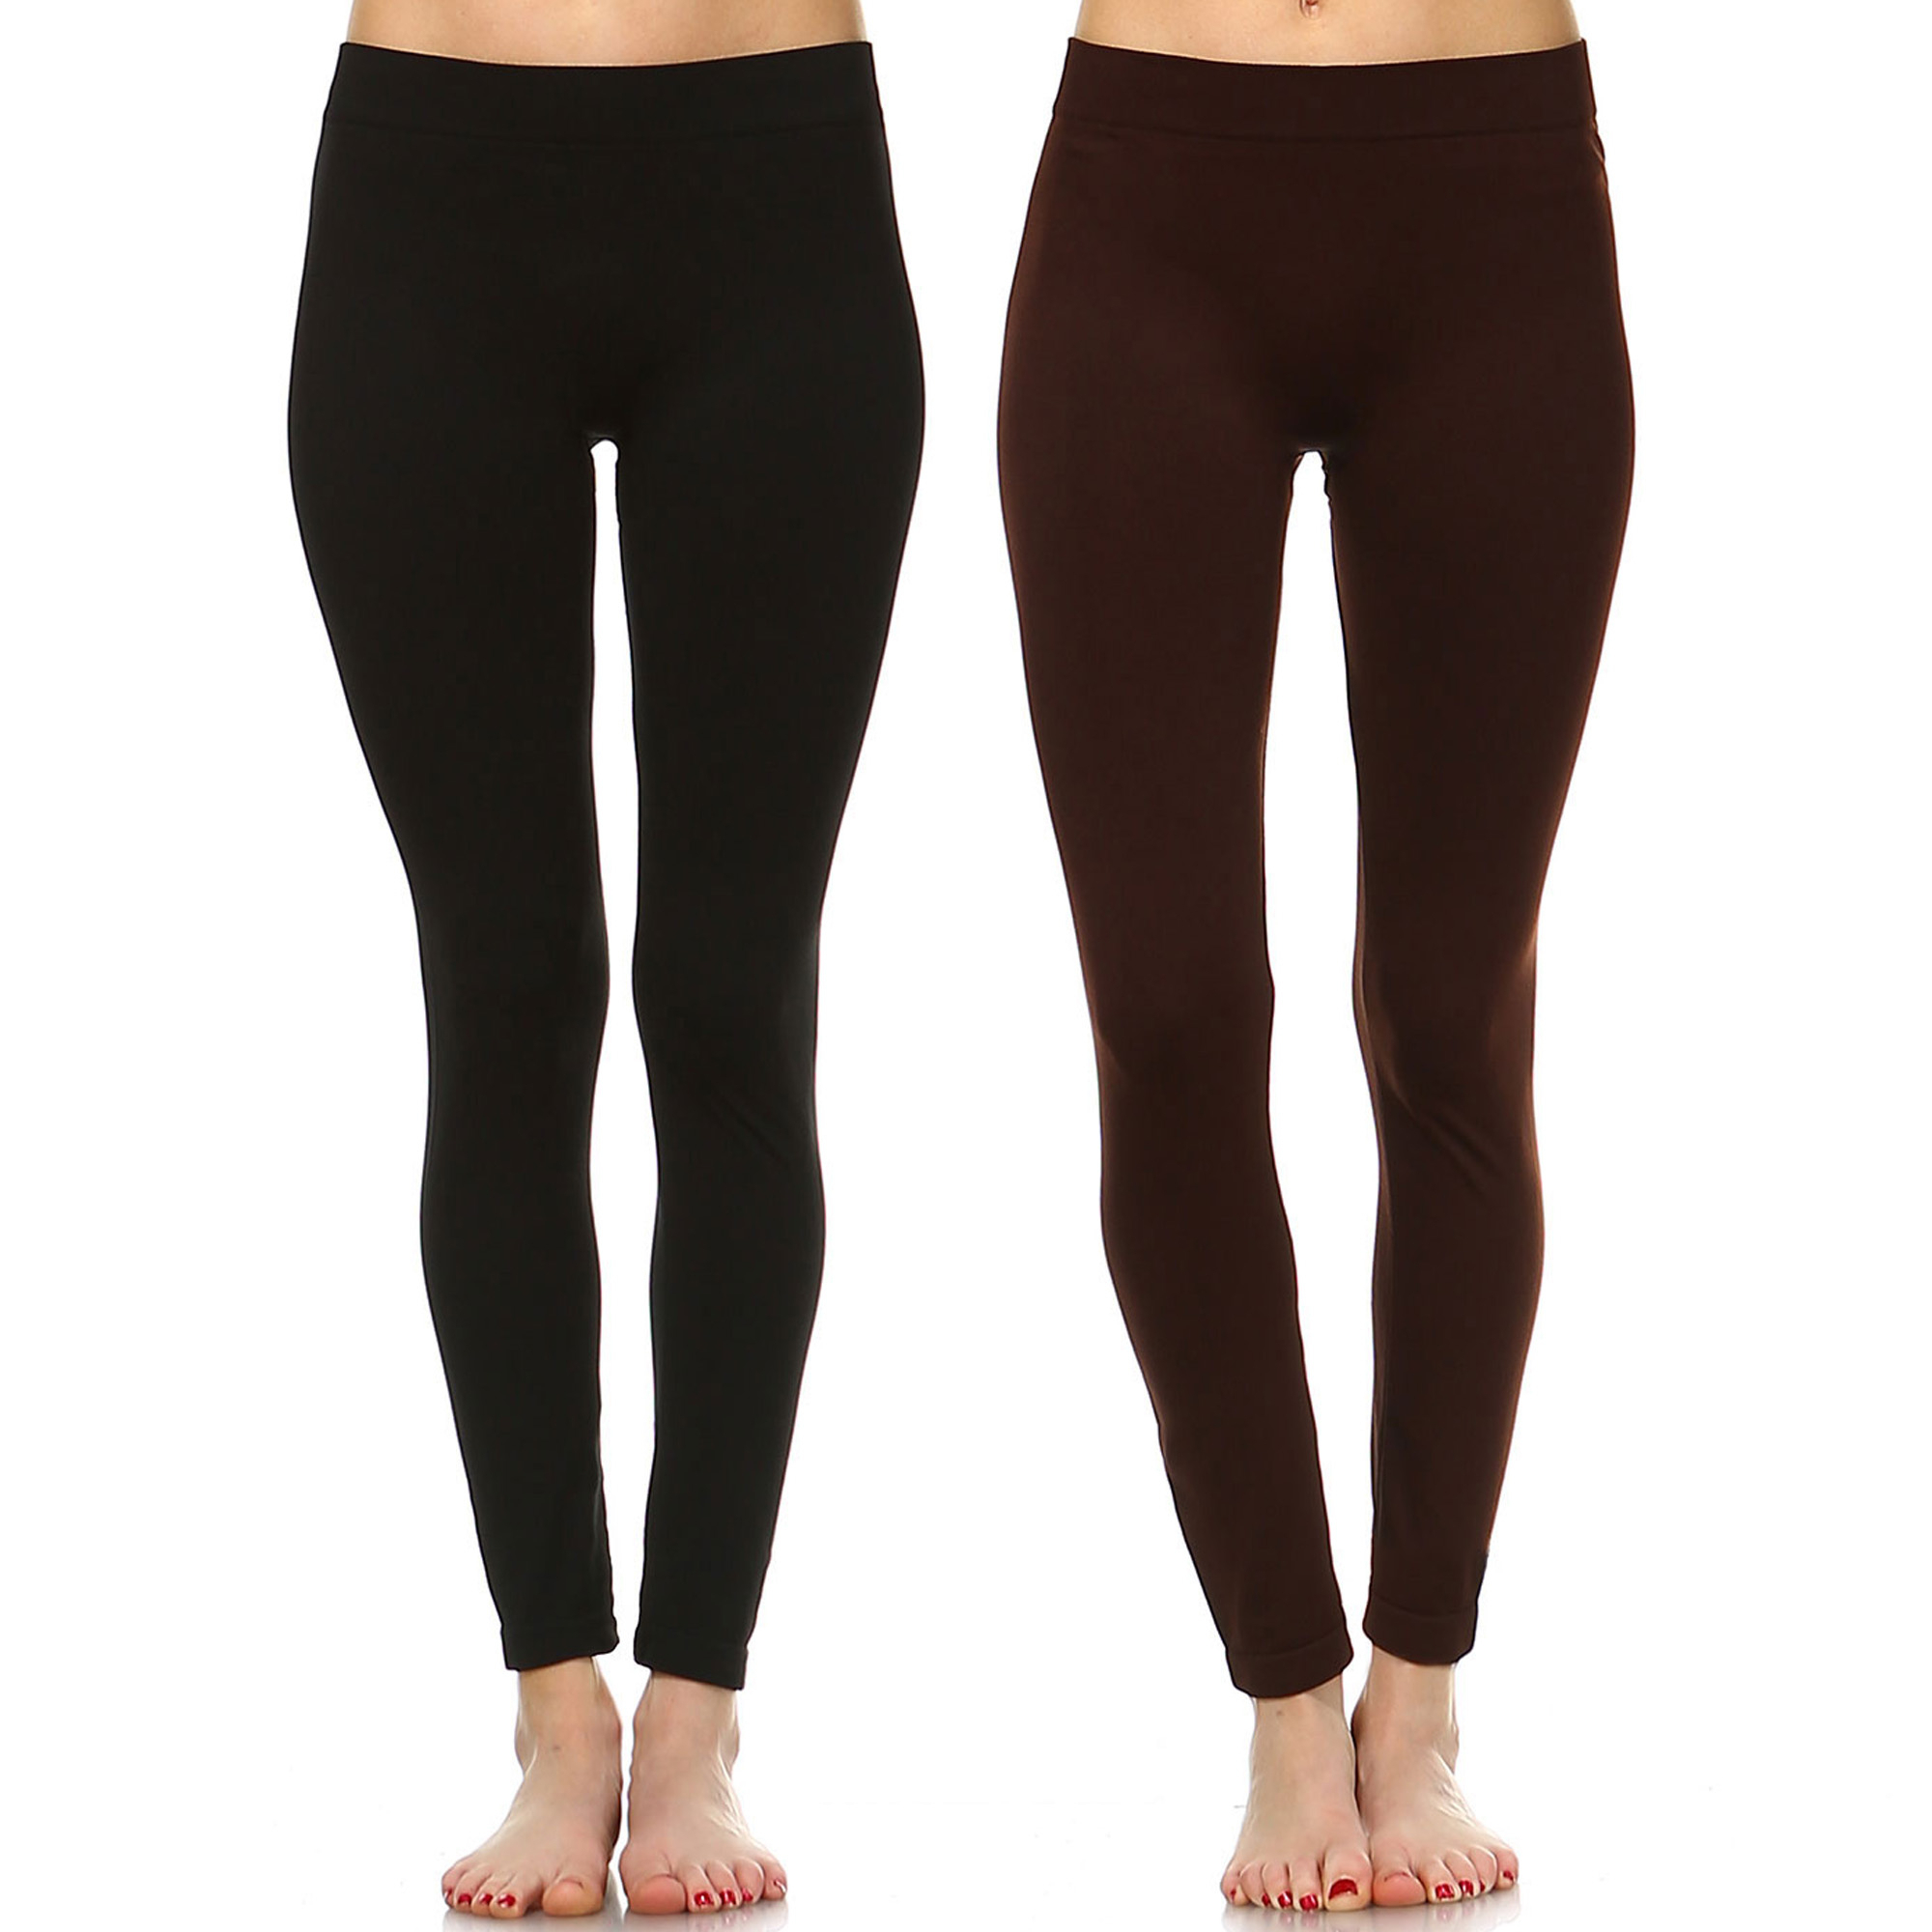 White Mark Women's Pack Of 2 Solid Color Leggings - Black, Purple, One Size - Plus